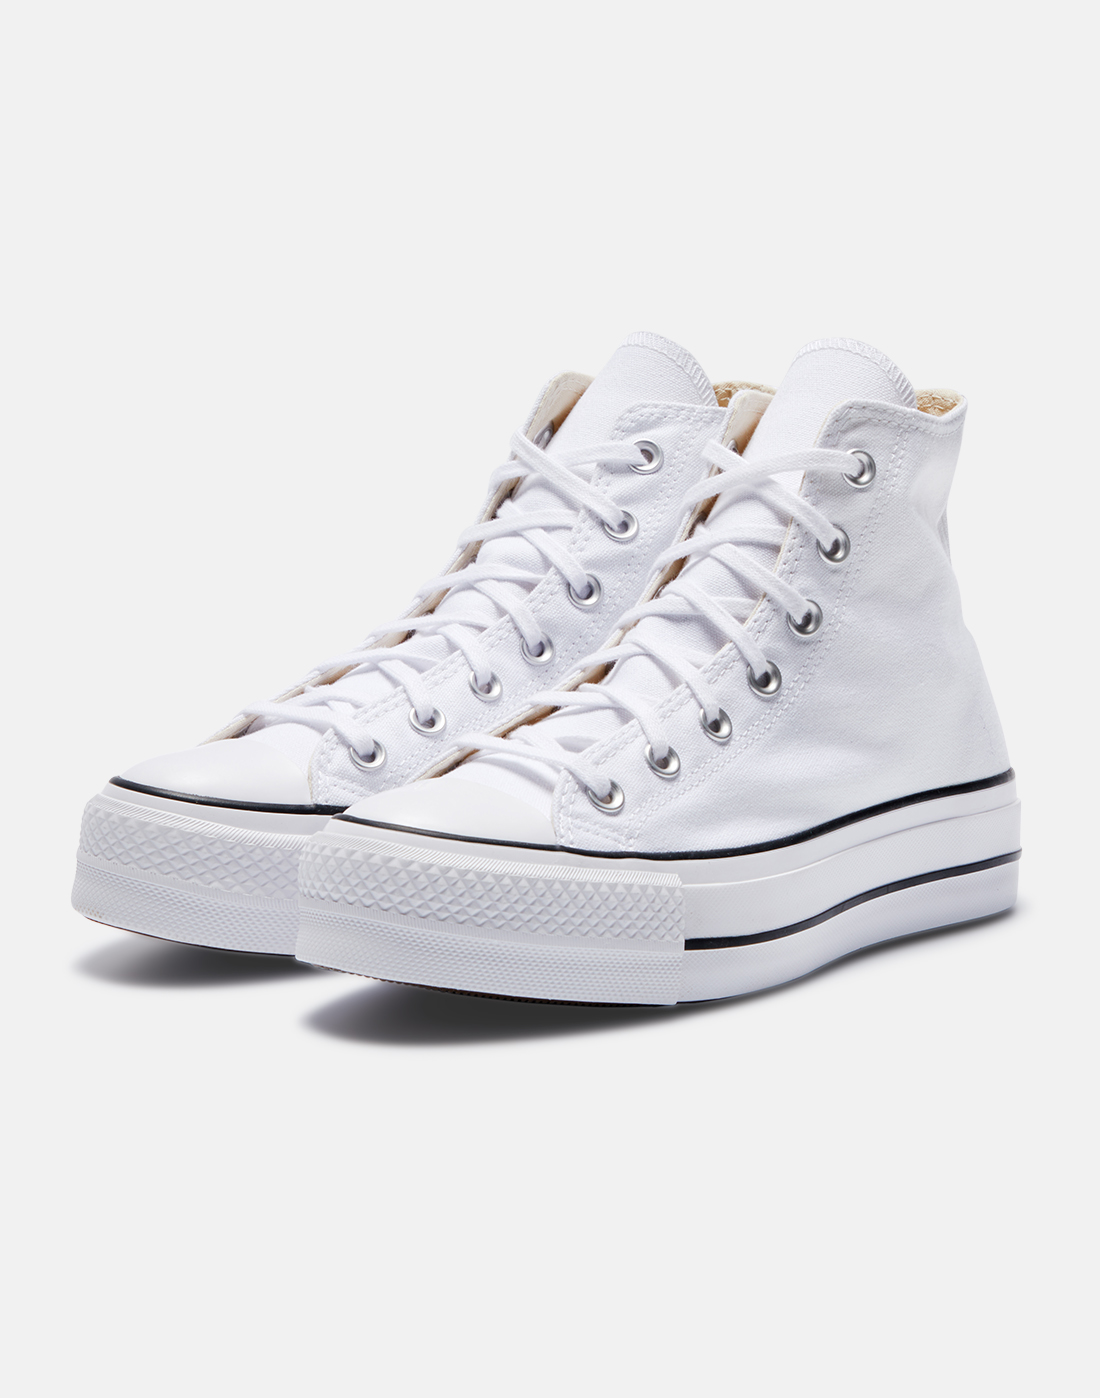 Converse Womens Chuck Taylor All Star Lift Hi - White | Life Style ...